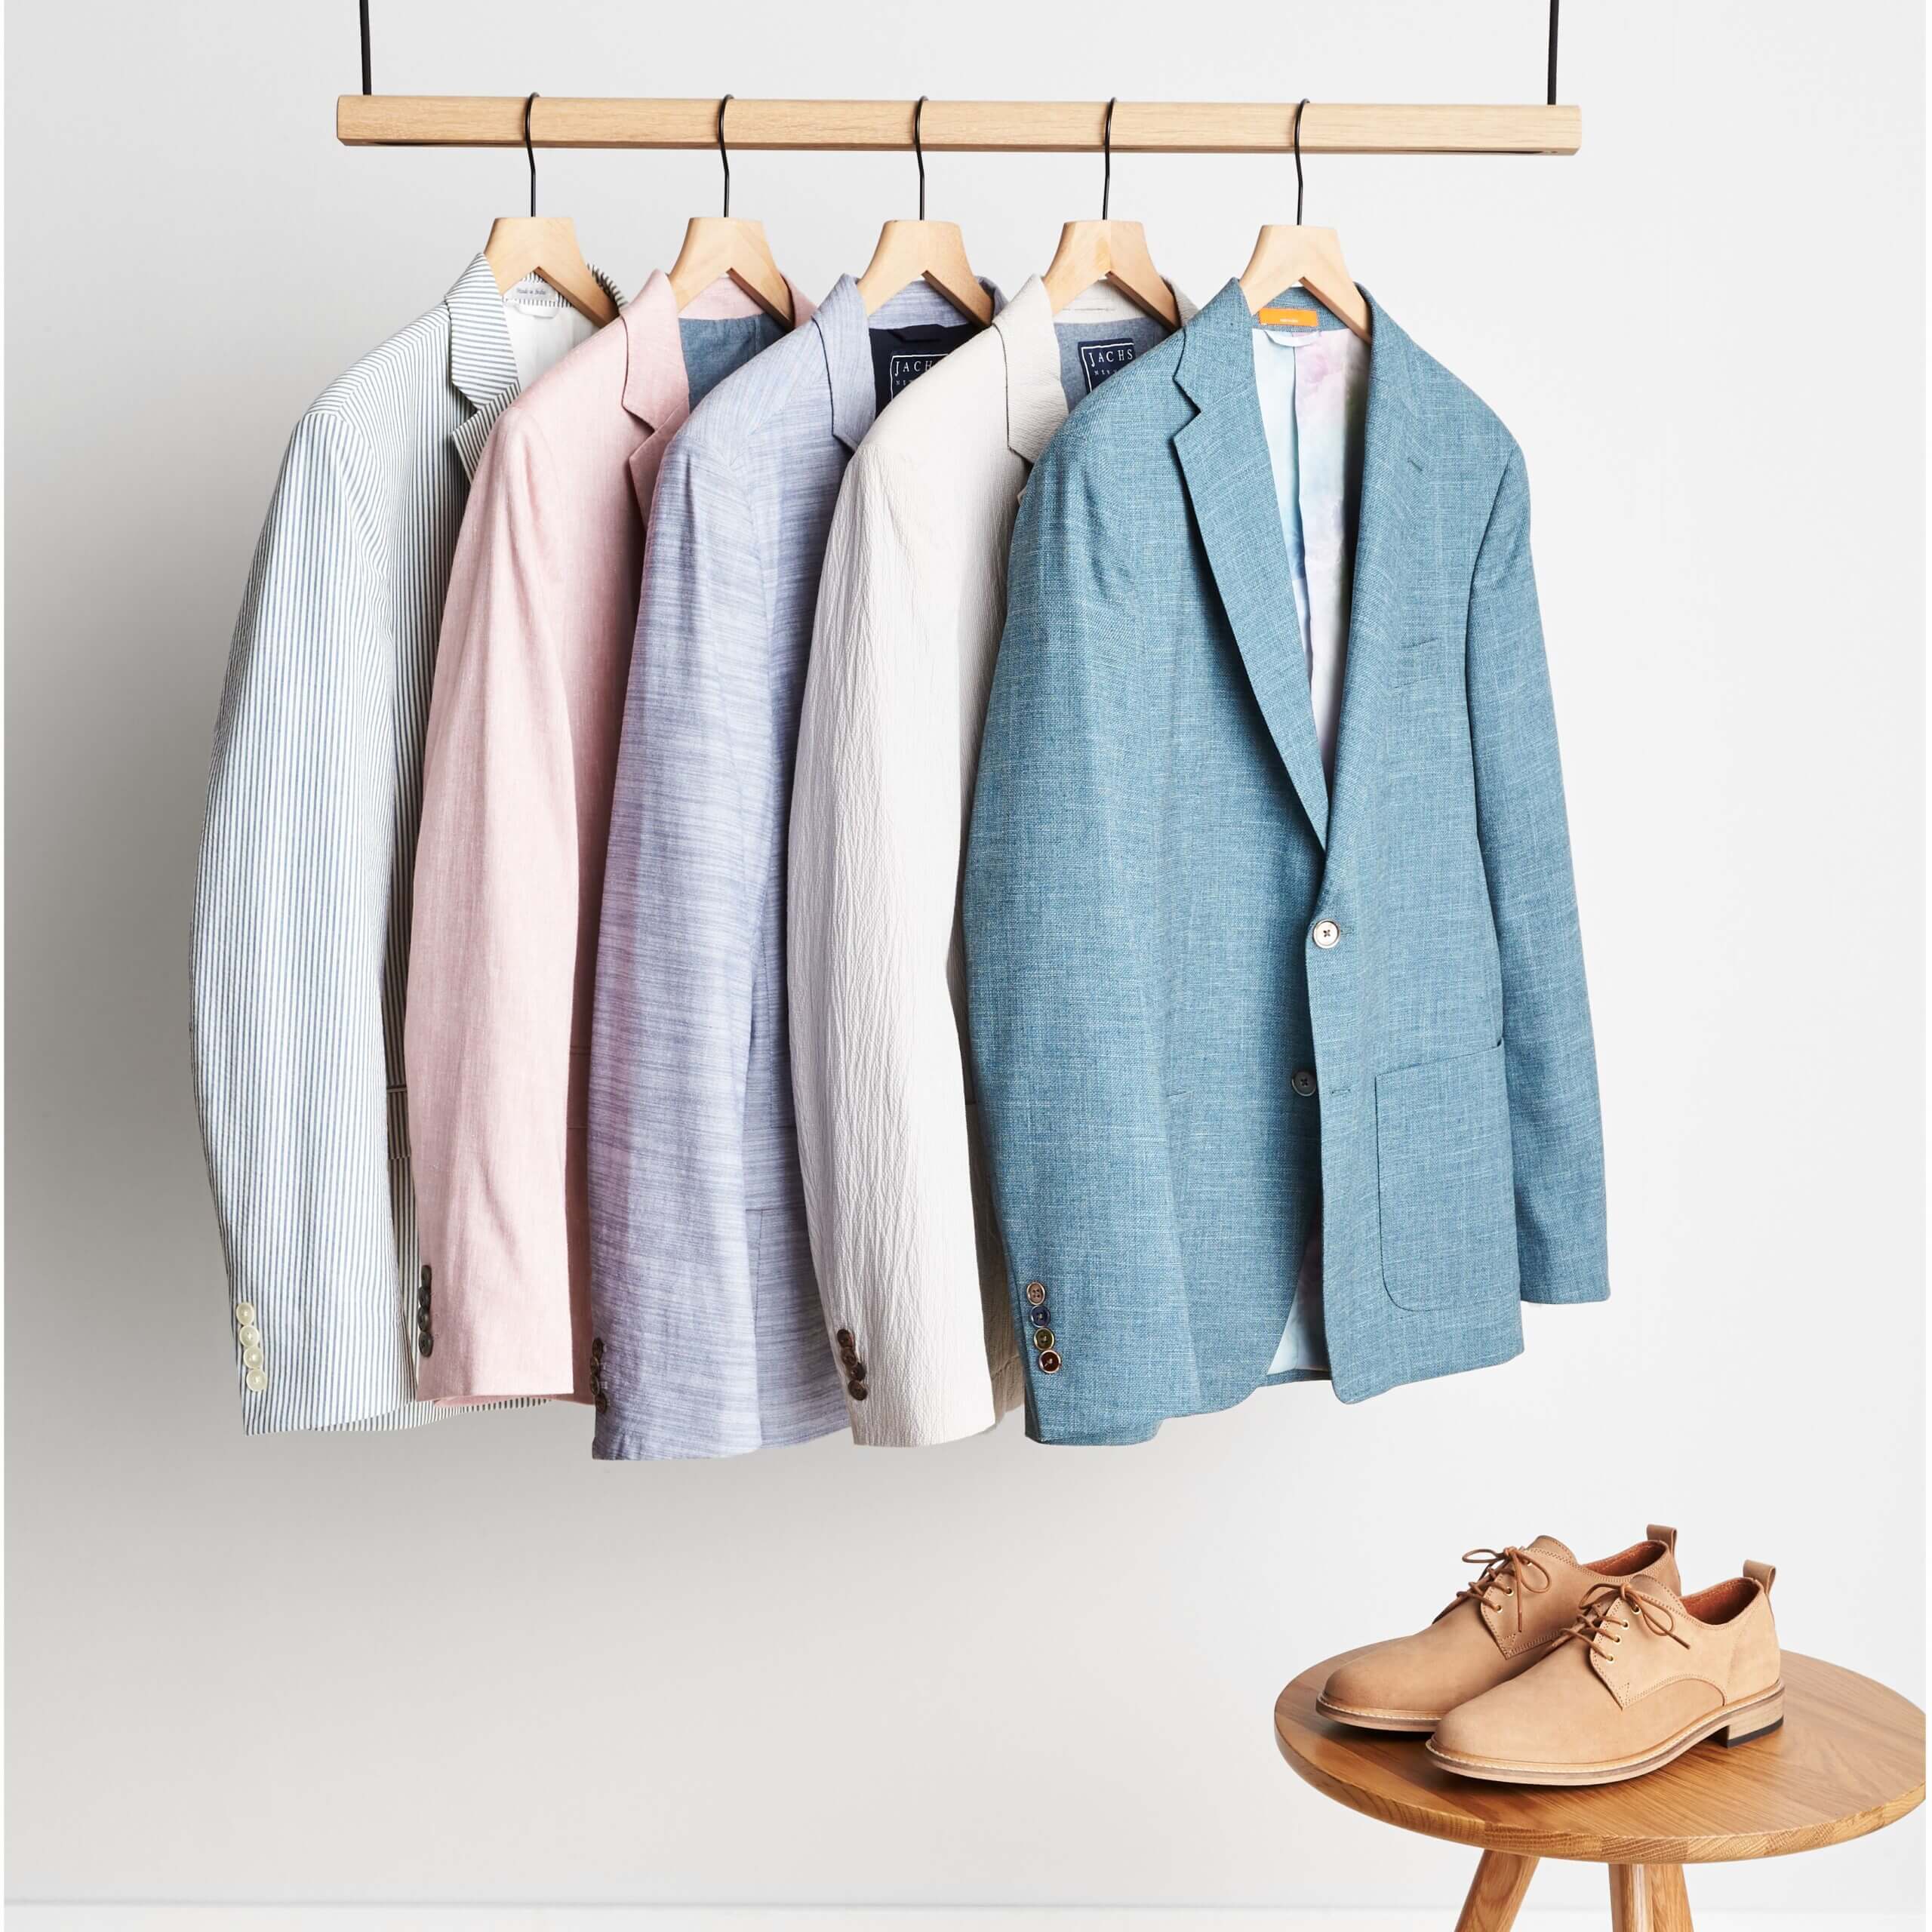 Stitch Fix - Spring is here! Is your closet ready? Schedule a Fix